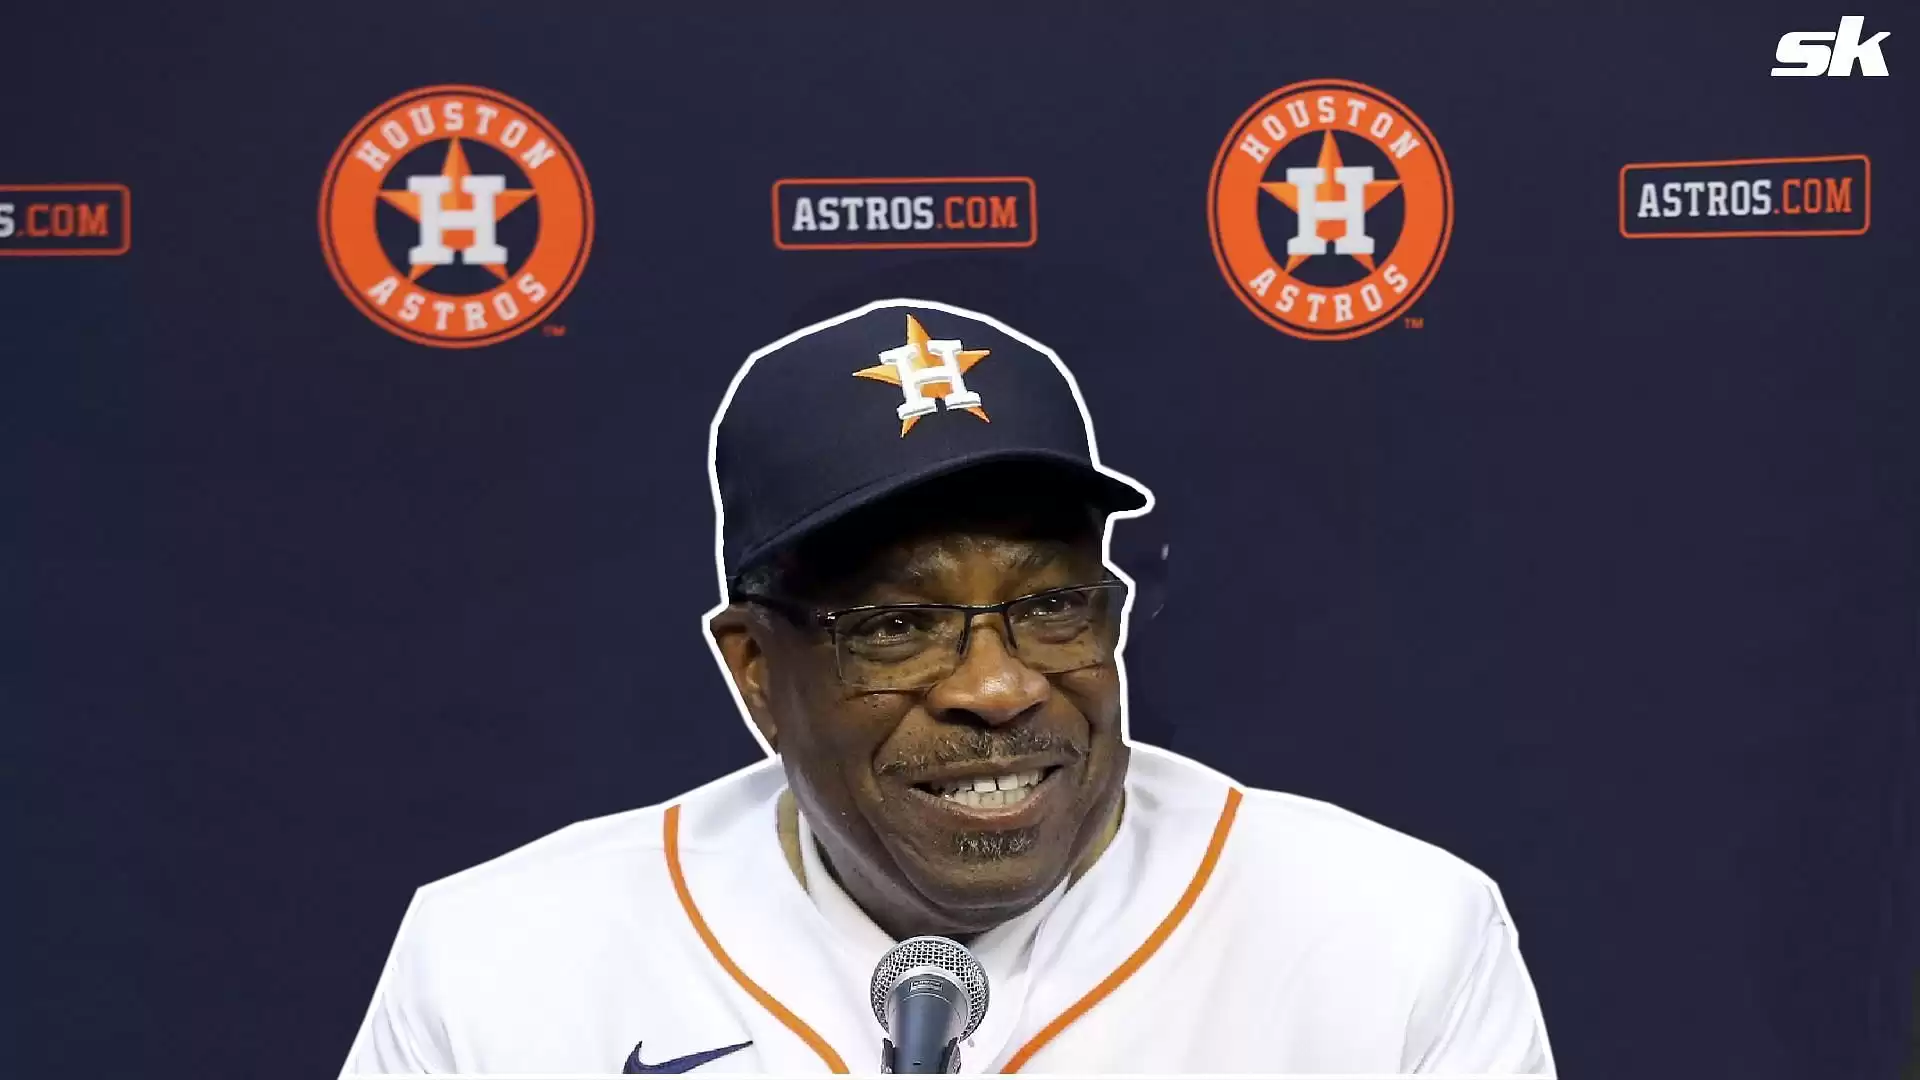 Dusty Baker Press Conference: Retiring Houston Astros Manager's Final Words